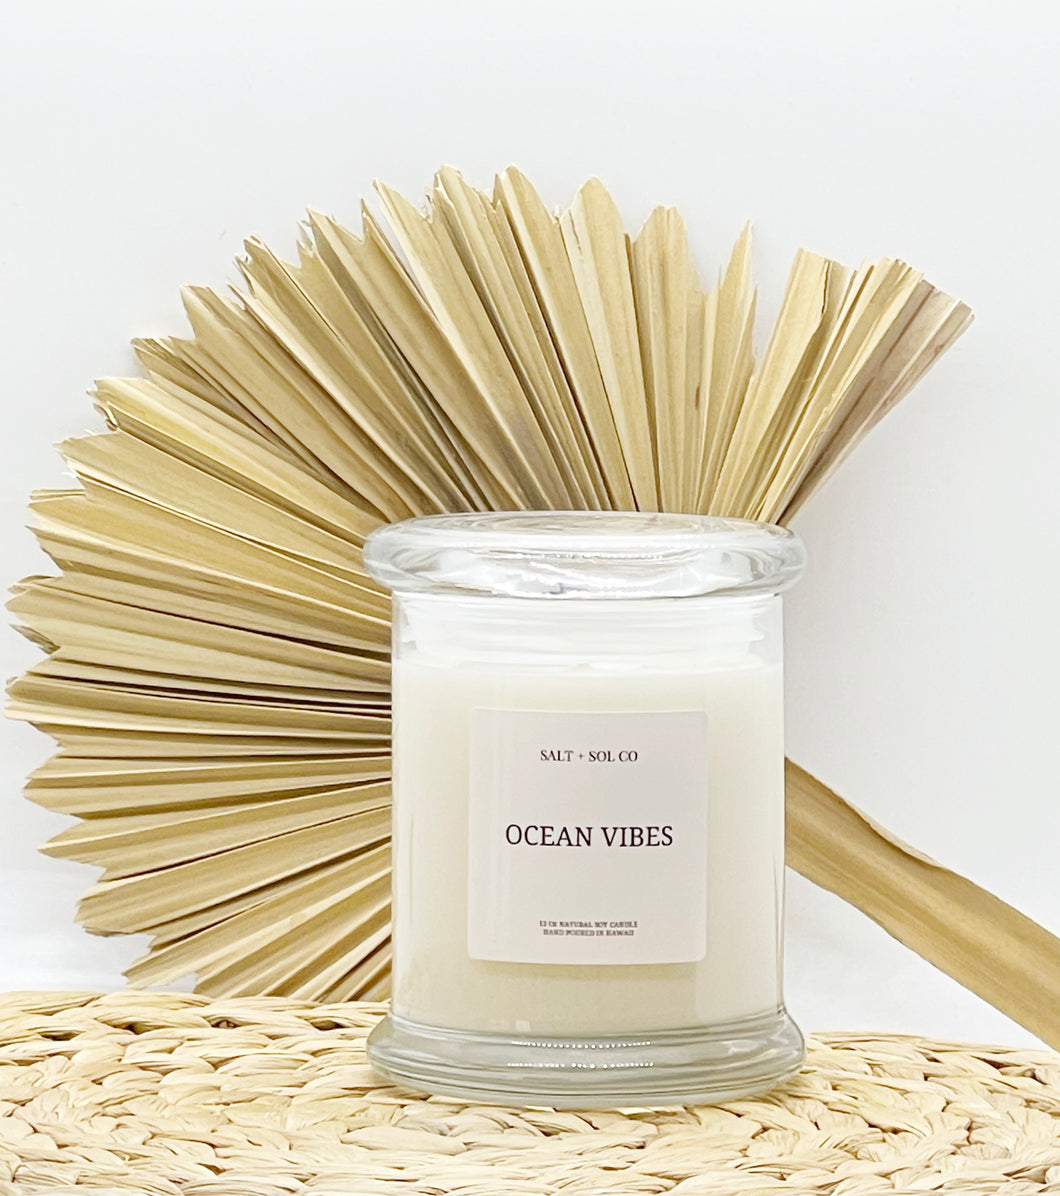 Ocean Vibes Soy Wax Candle